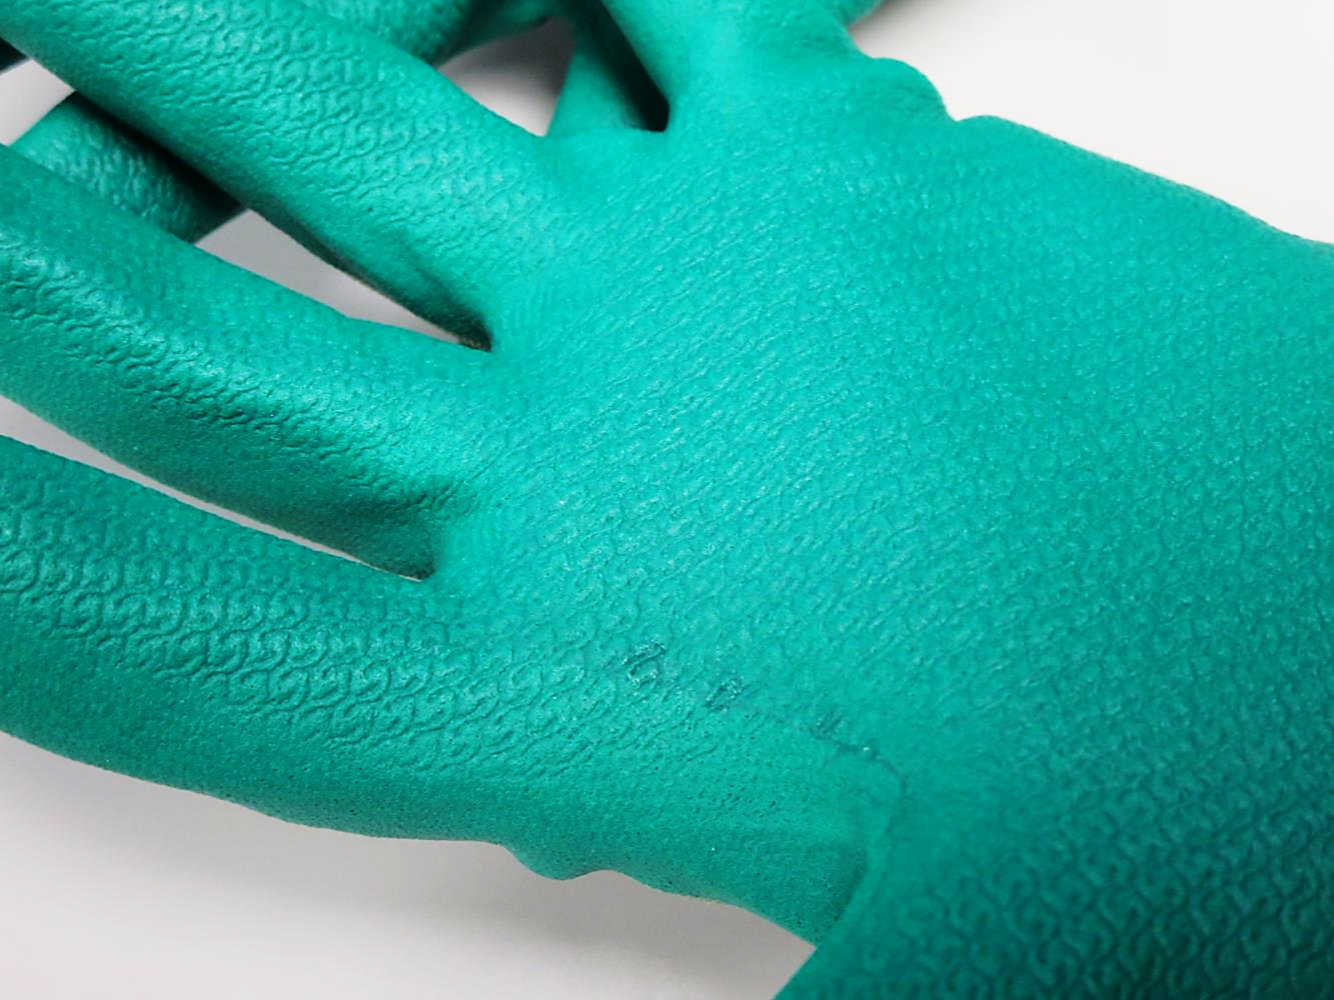 Showa® 383 Biodegradable Multi-Purpose Work Gloves with Green Waffle Pattern Microporous EBT Nitrile Coating 